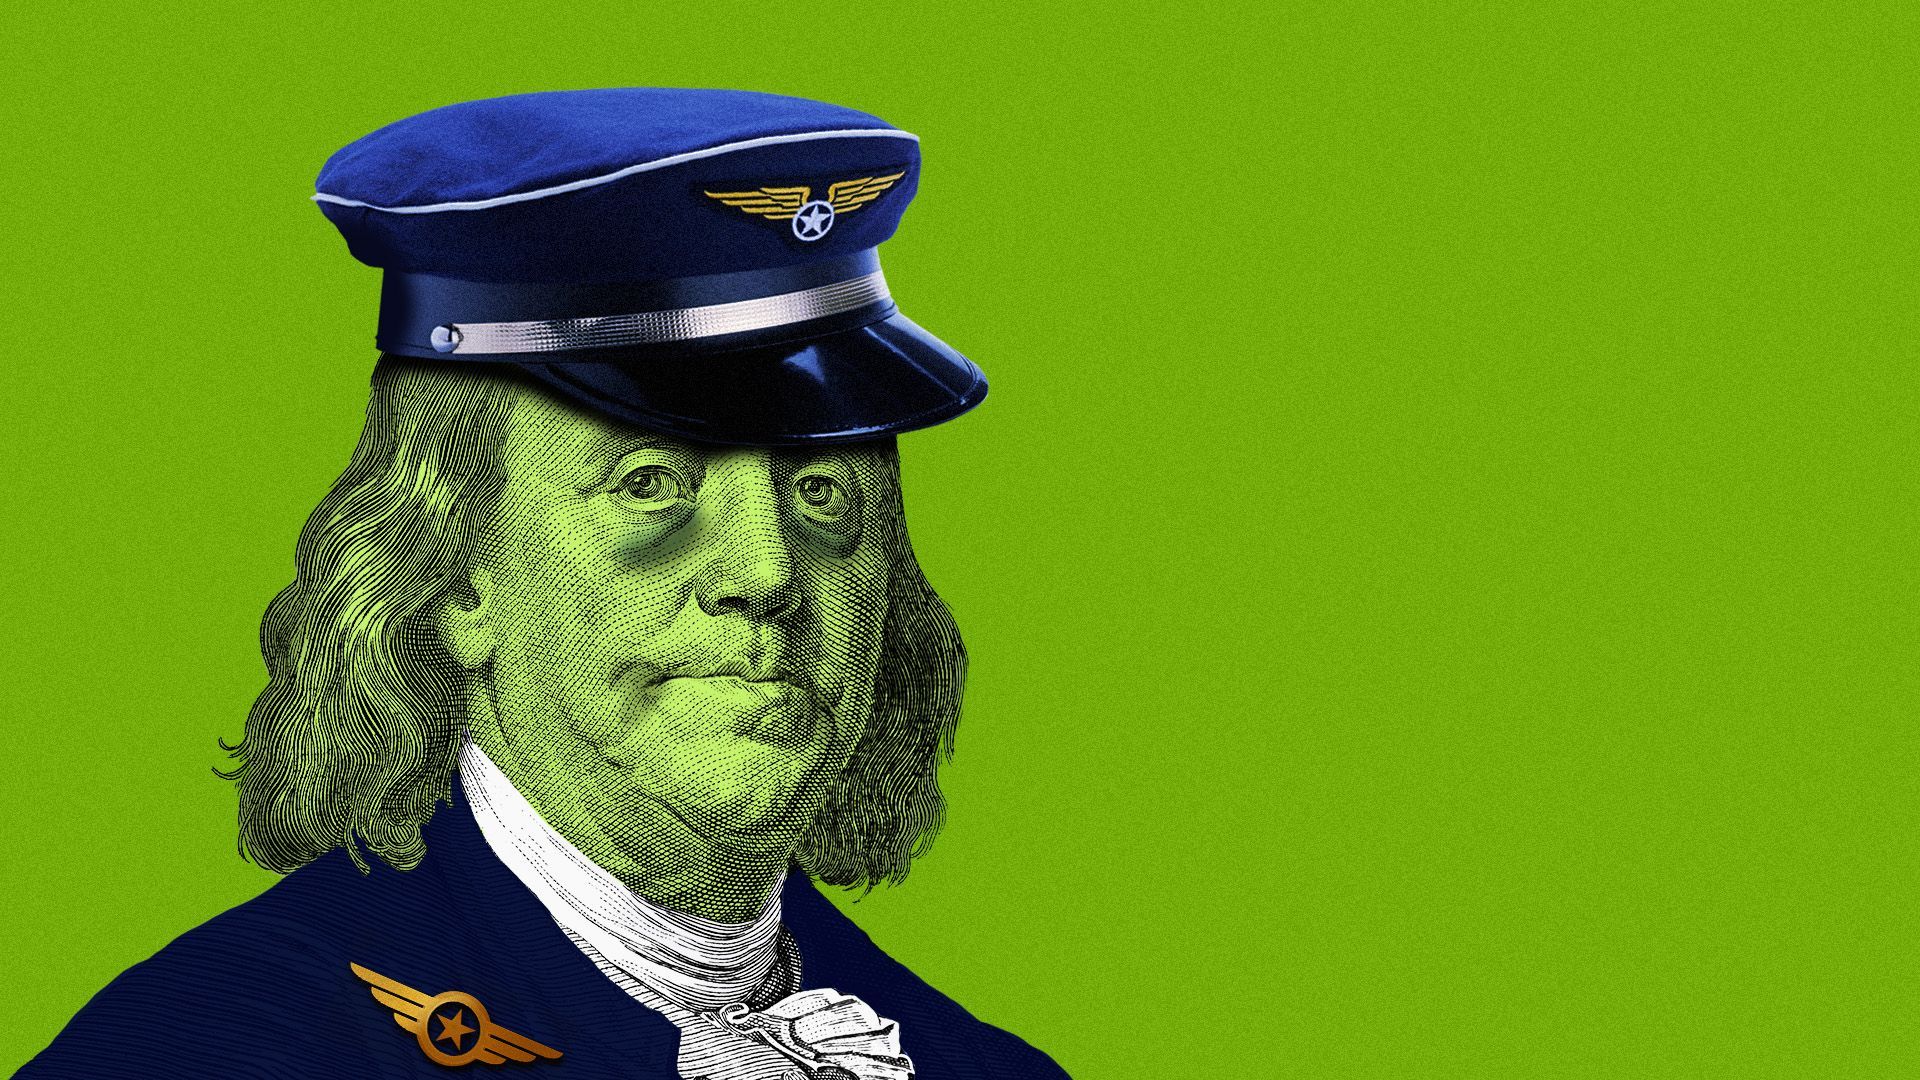 Illustration of Benjamin Franklin from a hundred dollar bill with bags under his eyes wearing a pilot's uniform 